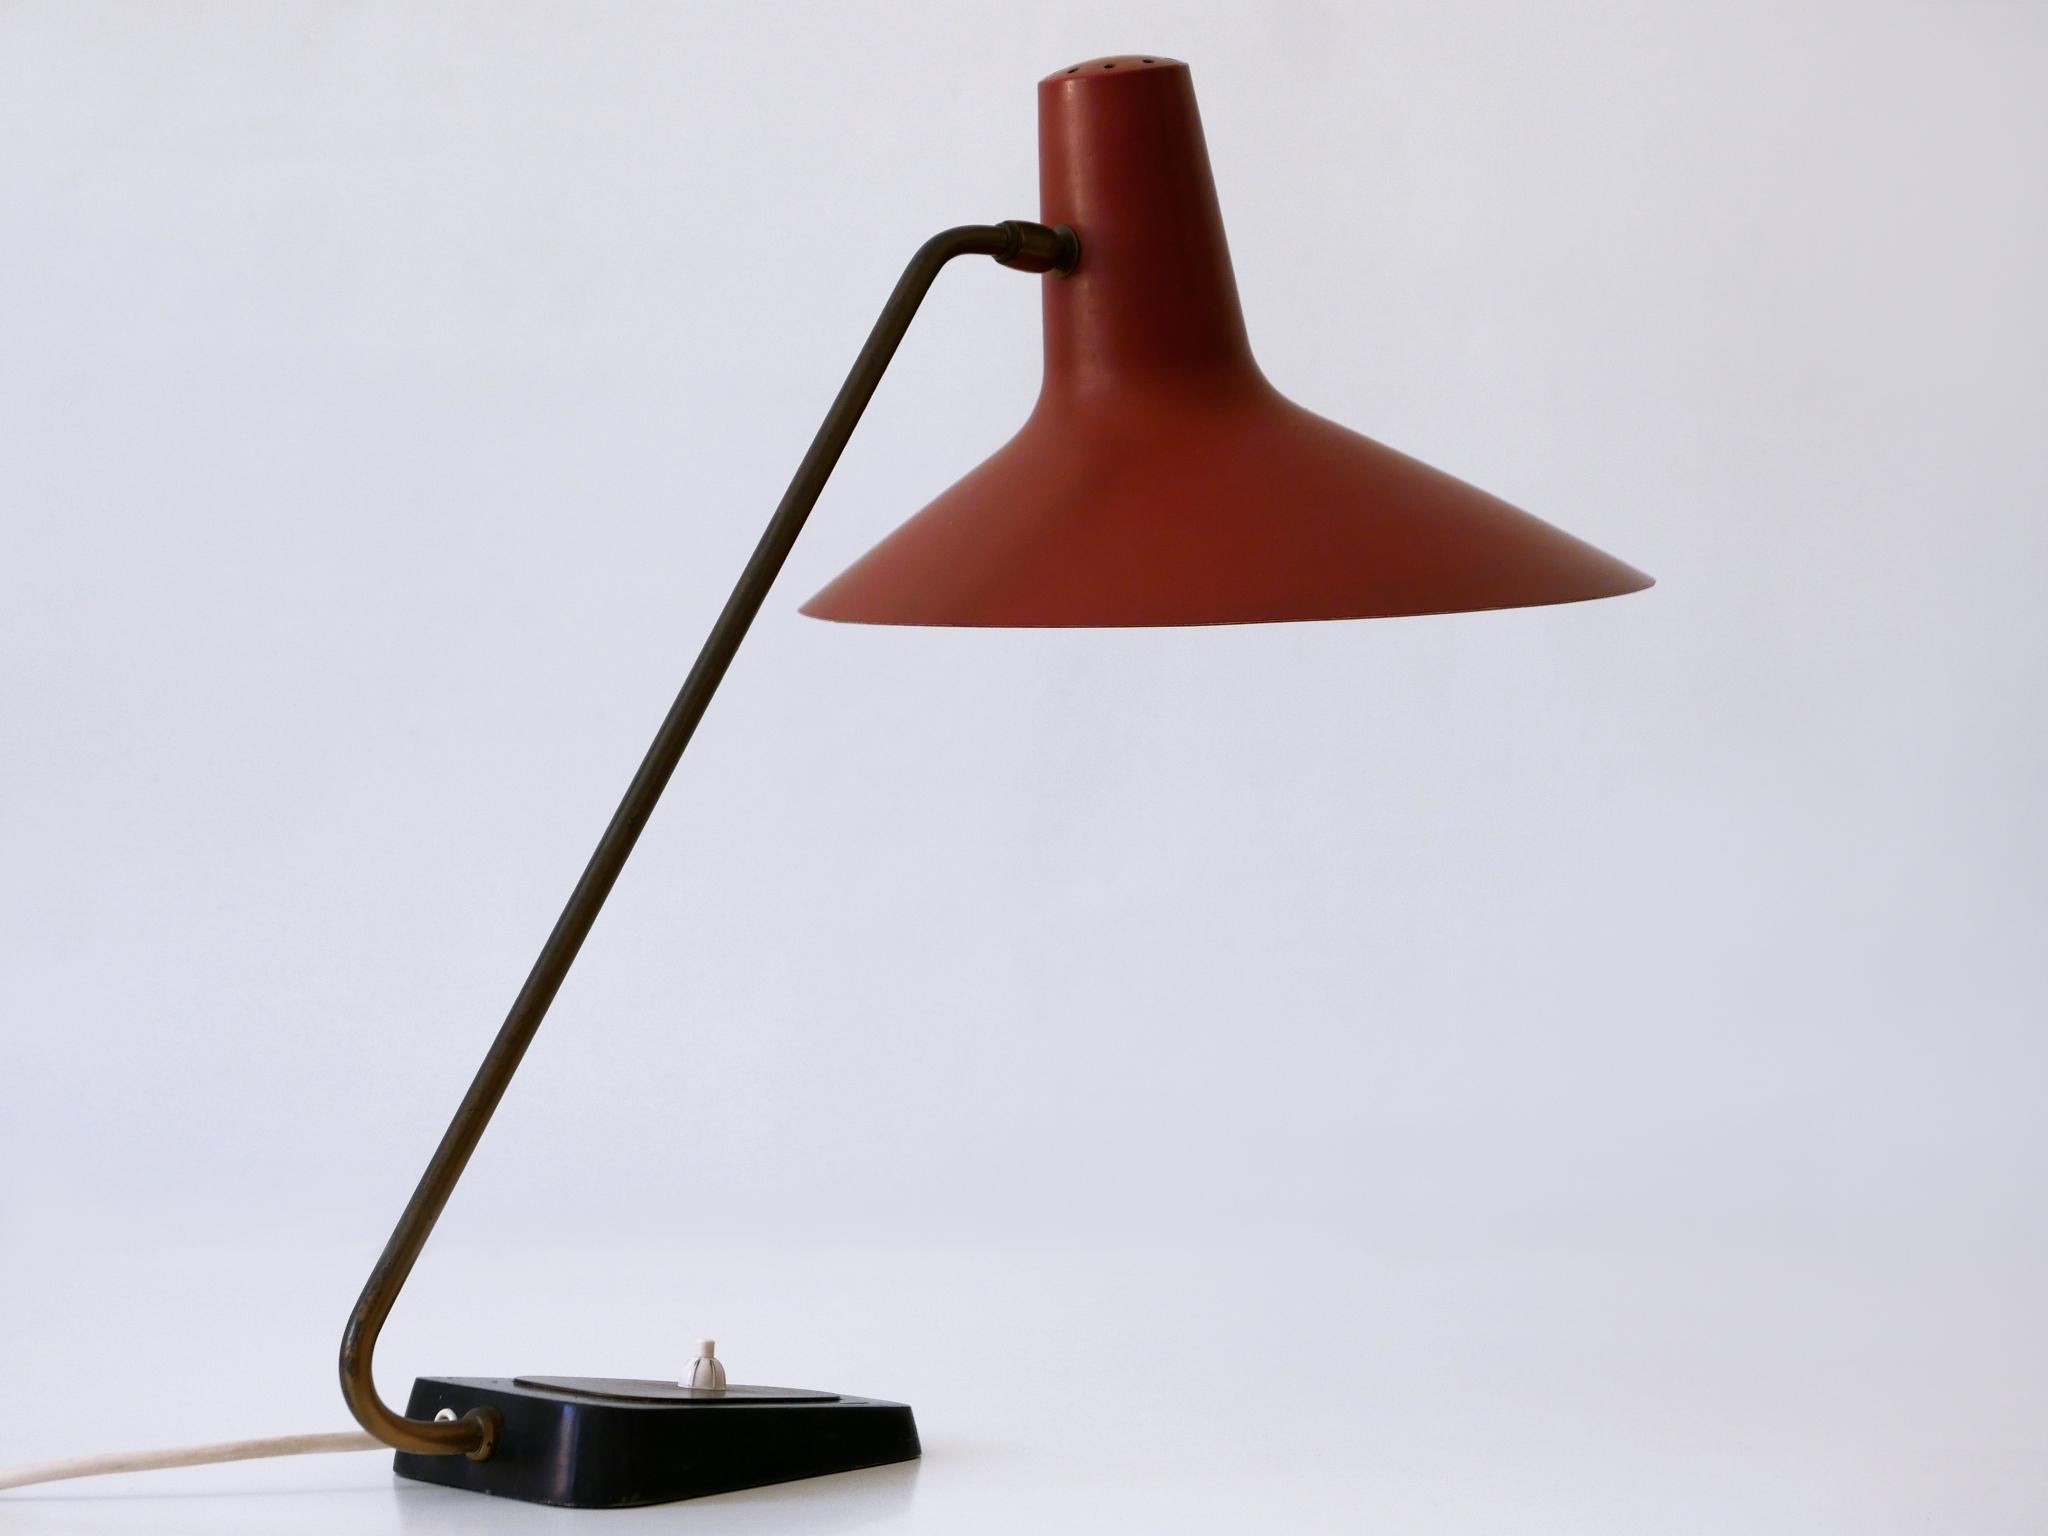 Exceptional Mid-Century Modern Table Lamp by Gebrüder Cosack Germany 1950s For Sale 1